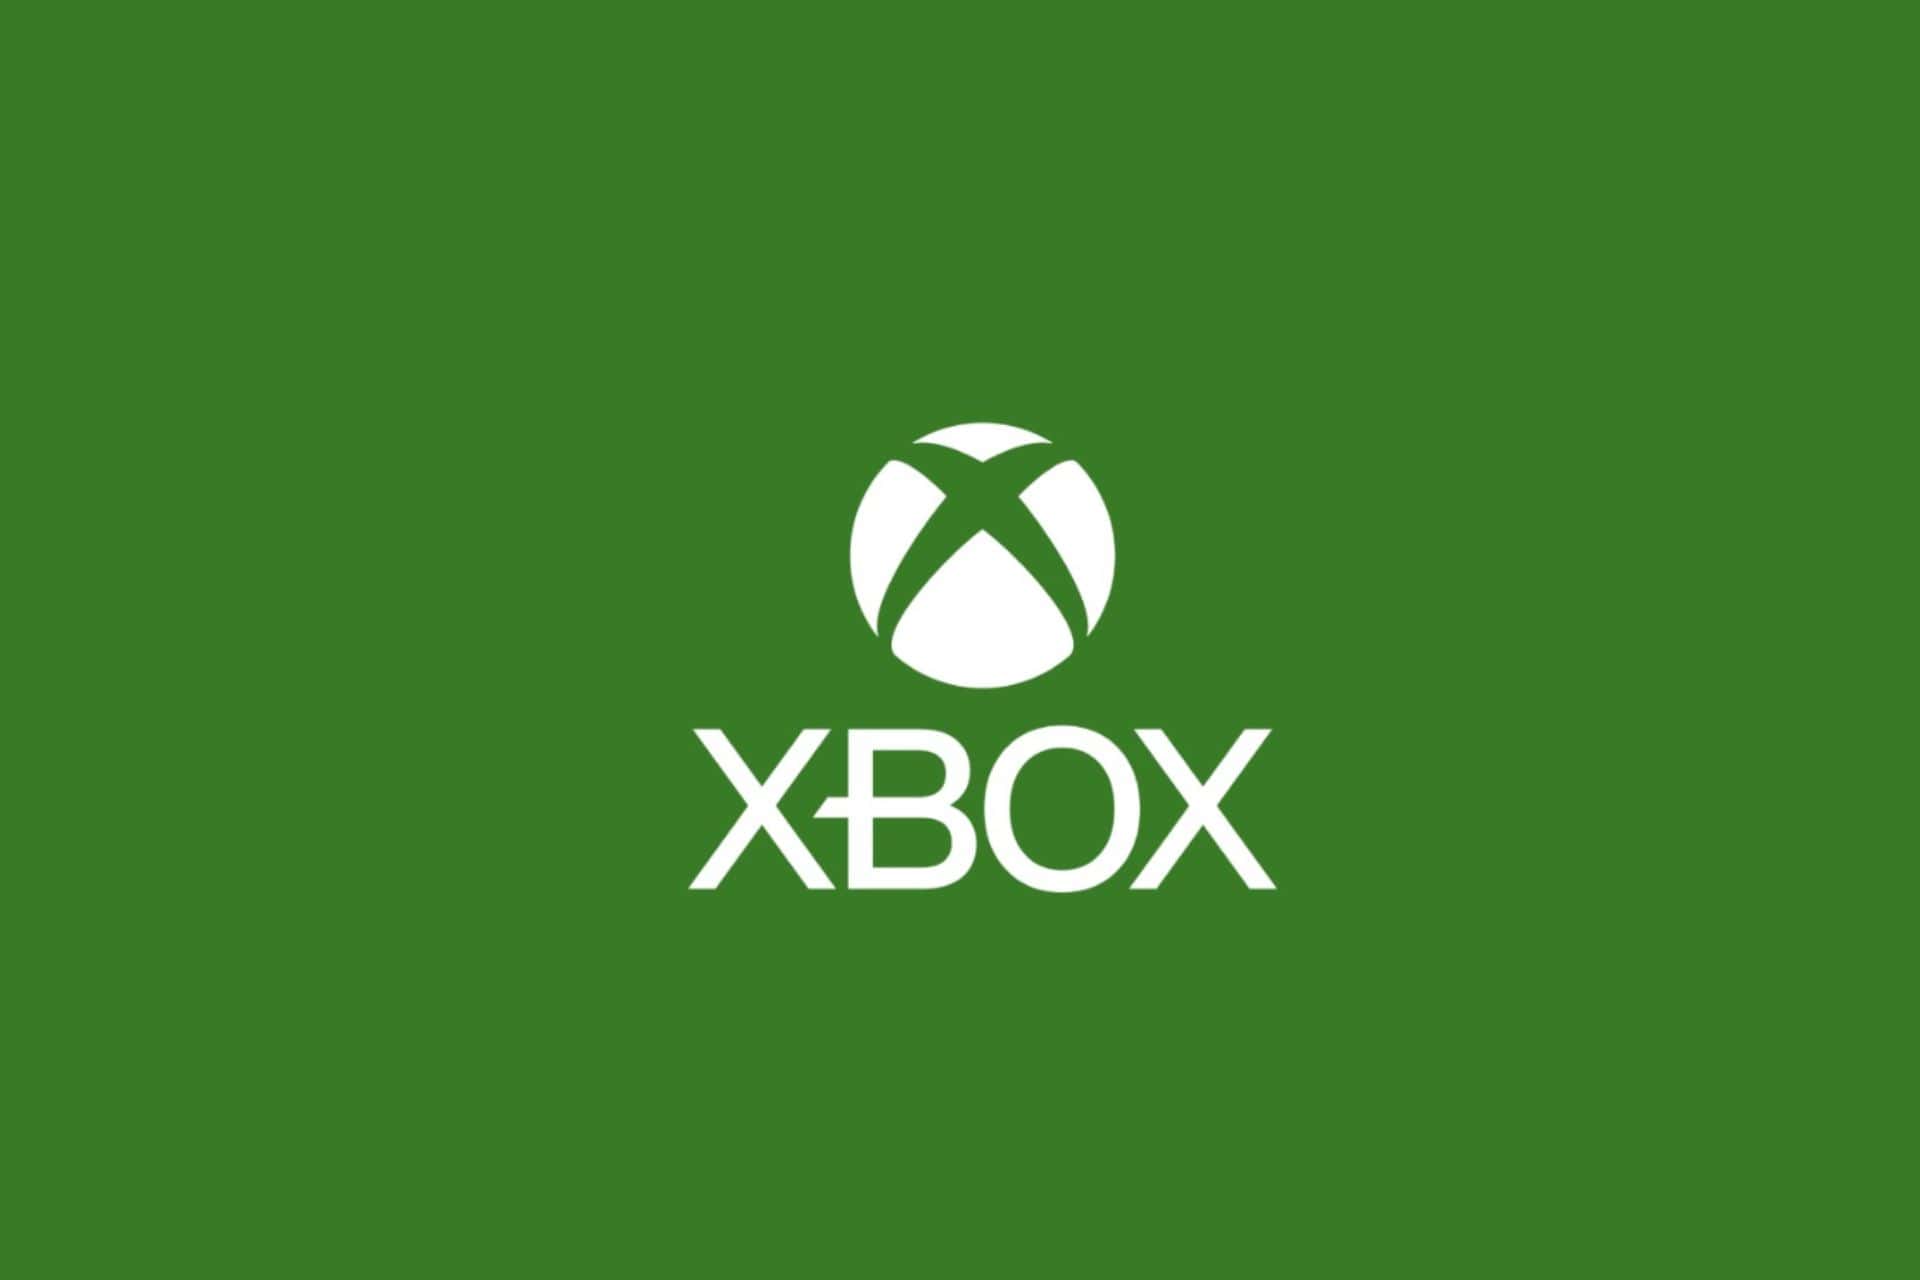 How to enable VRR on Xbox